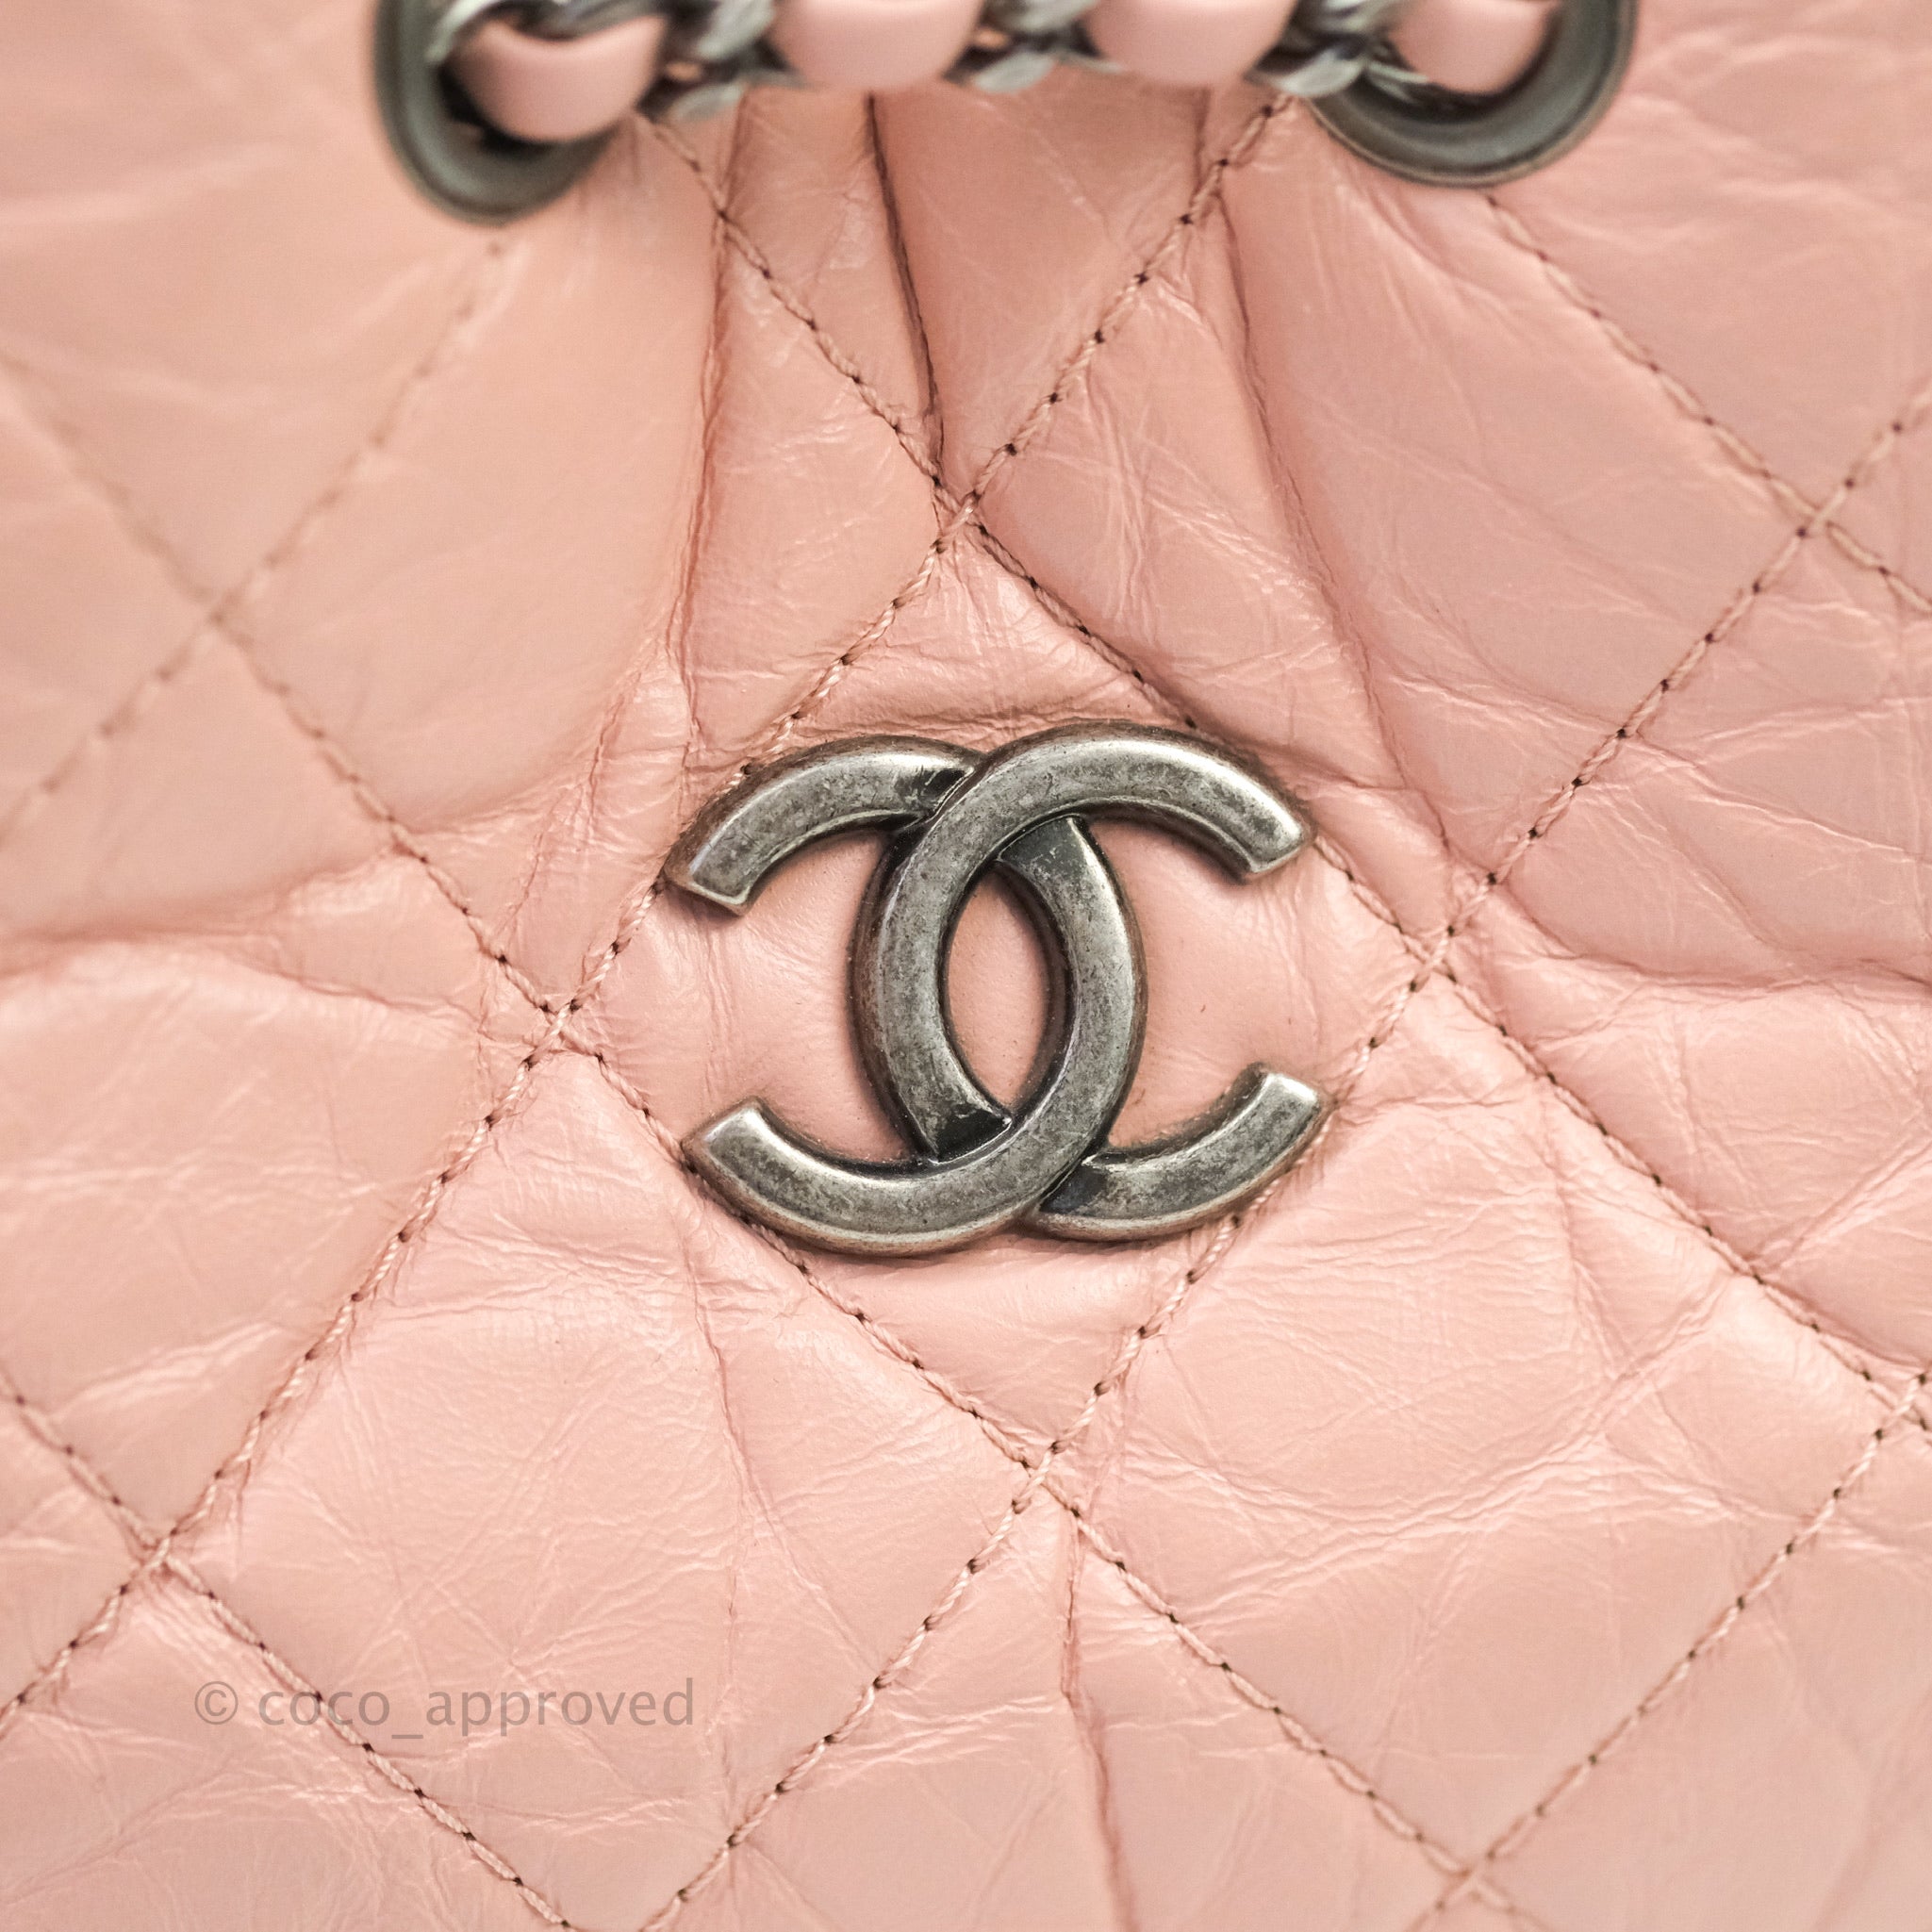 chanel gabrielle backpack